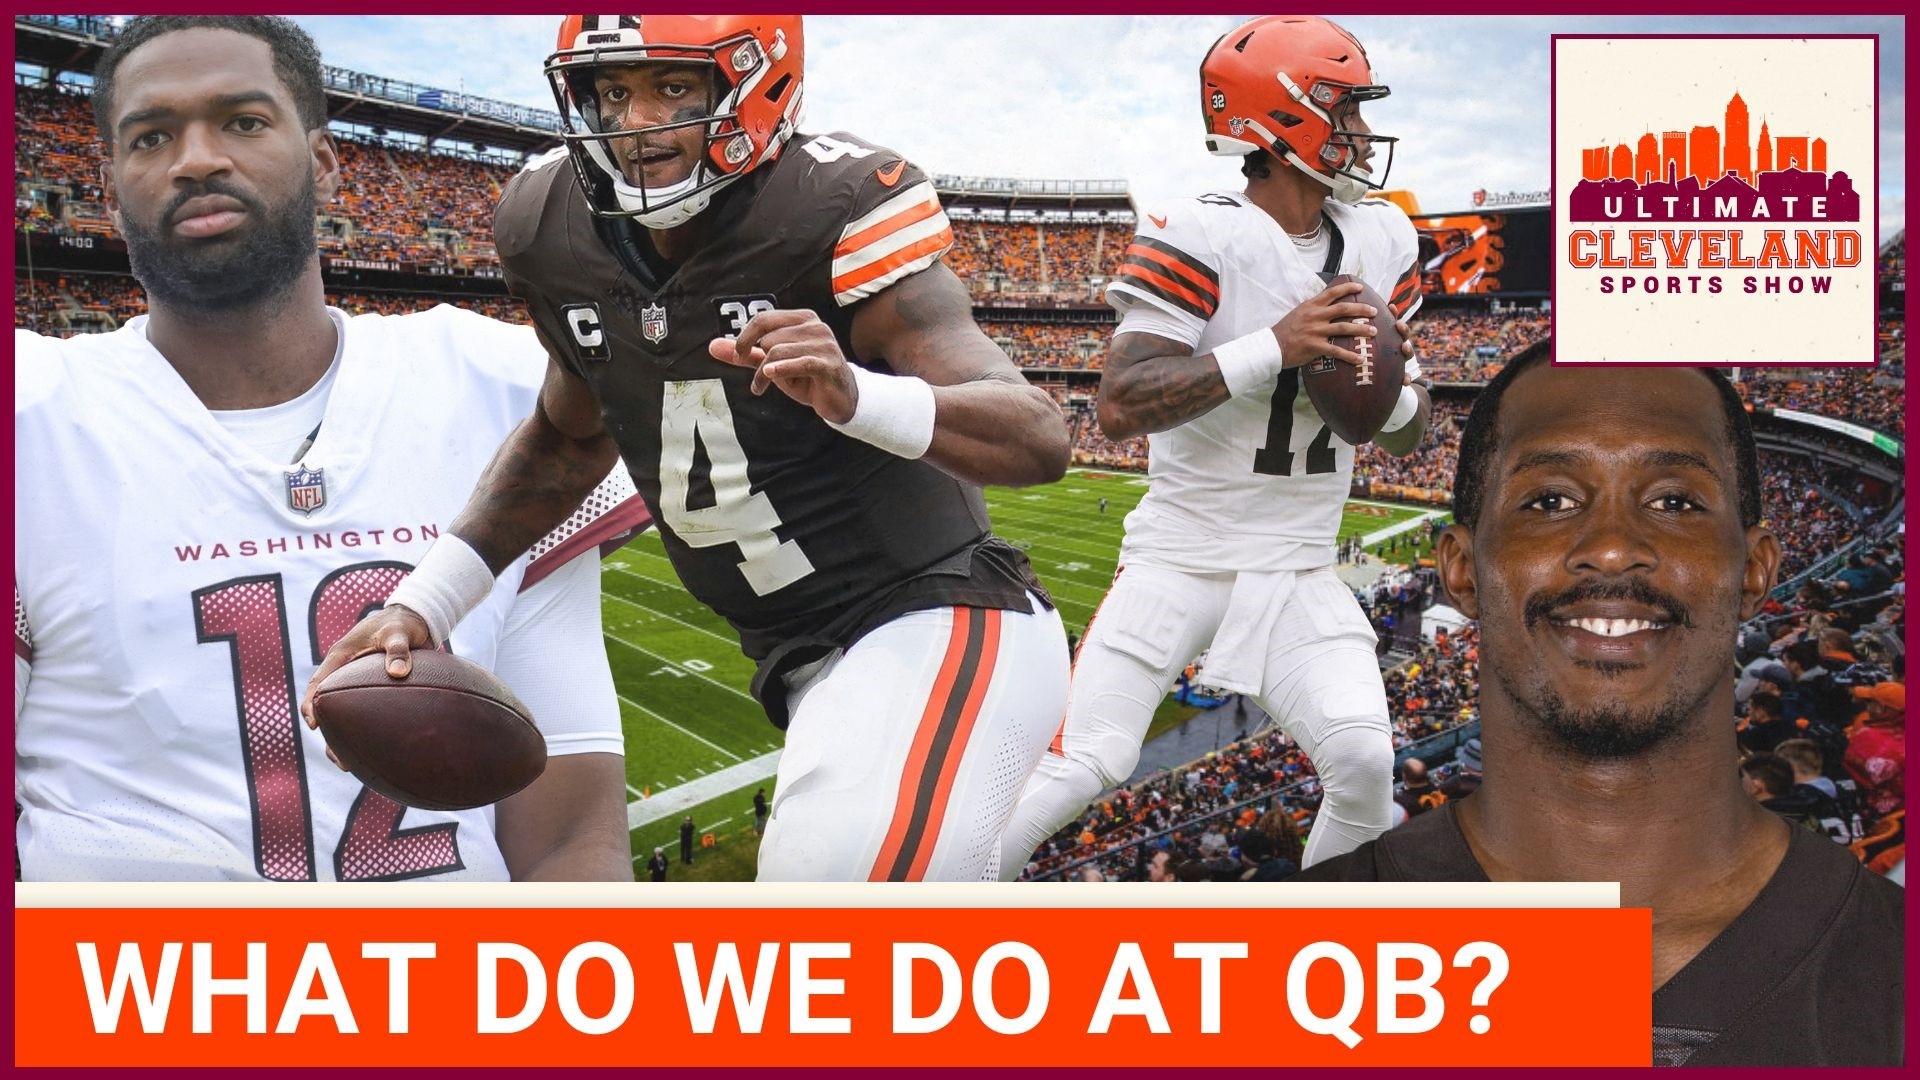 Jacoby Brissett? Kirk Cousins? Who do the Browns need to try and get to solidfy the QB room?